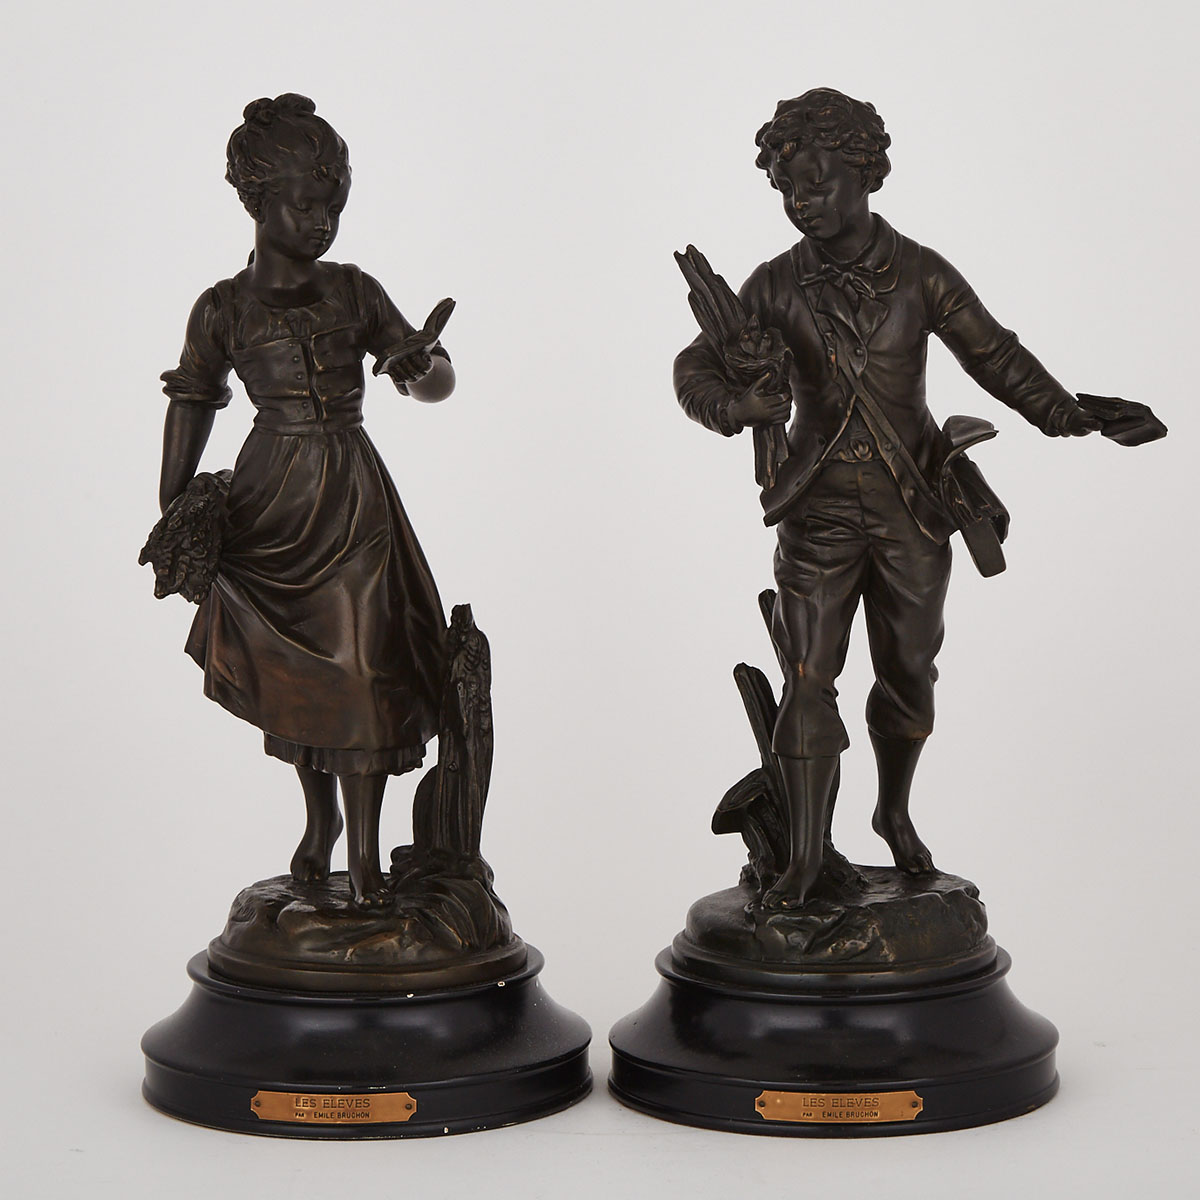 Pair of French Patinated Bronze Figures of Student Peasants, after Emile Bruchon, 20th century